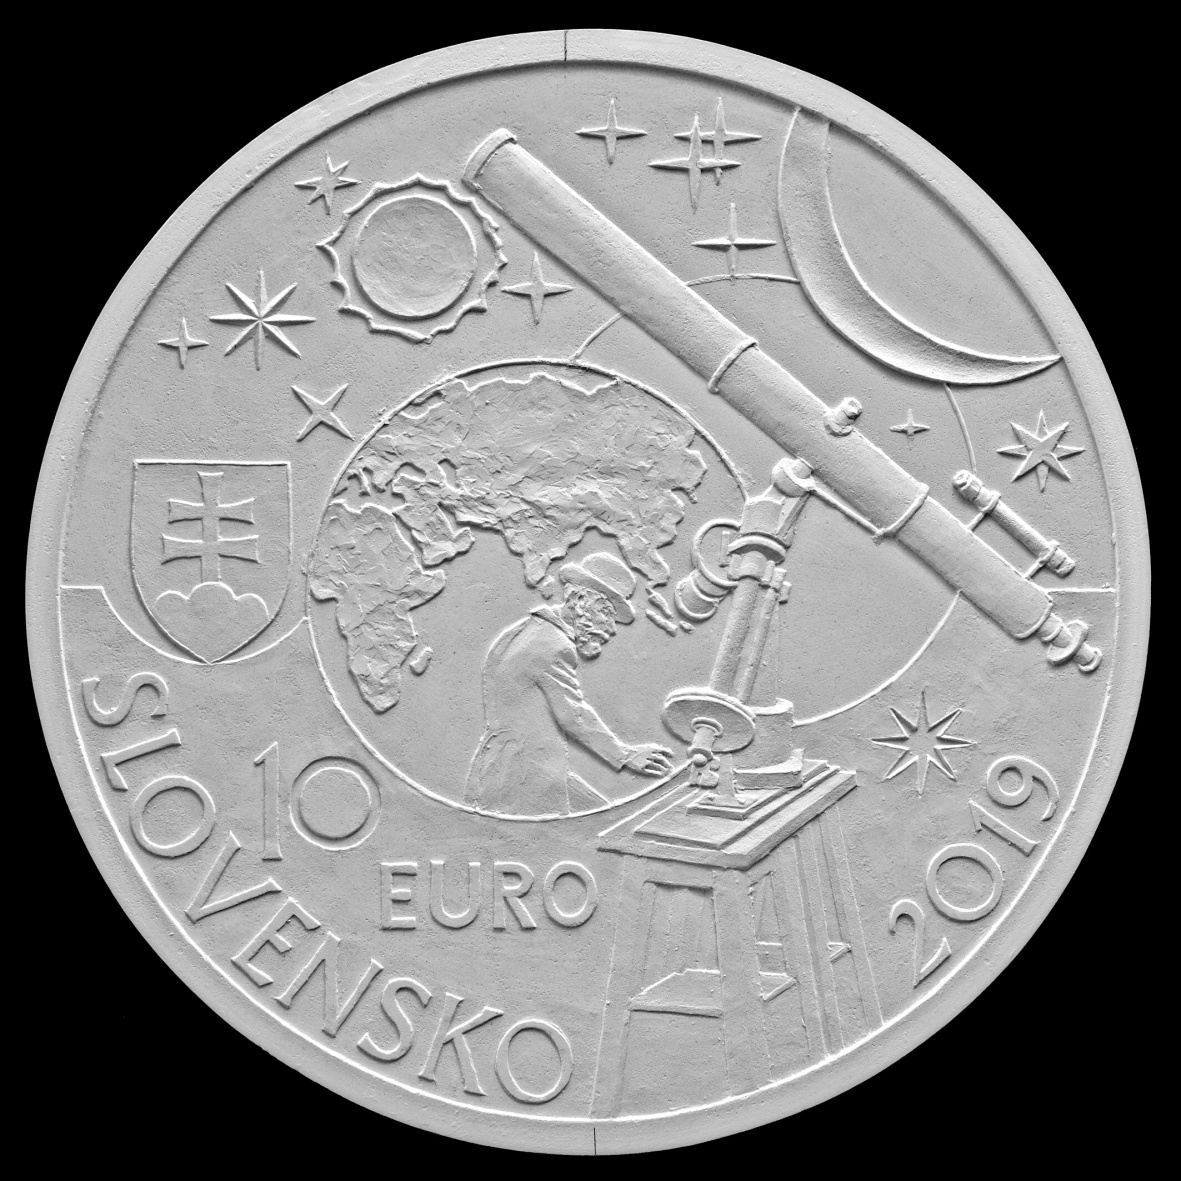 Reduced first prize and the design selected for the coin’s reverse